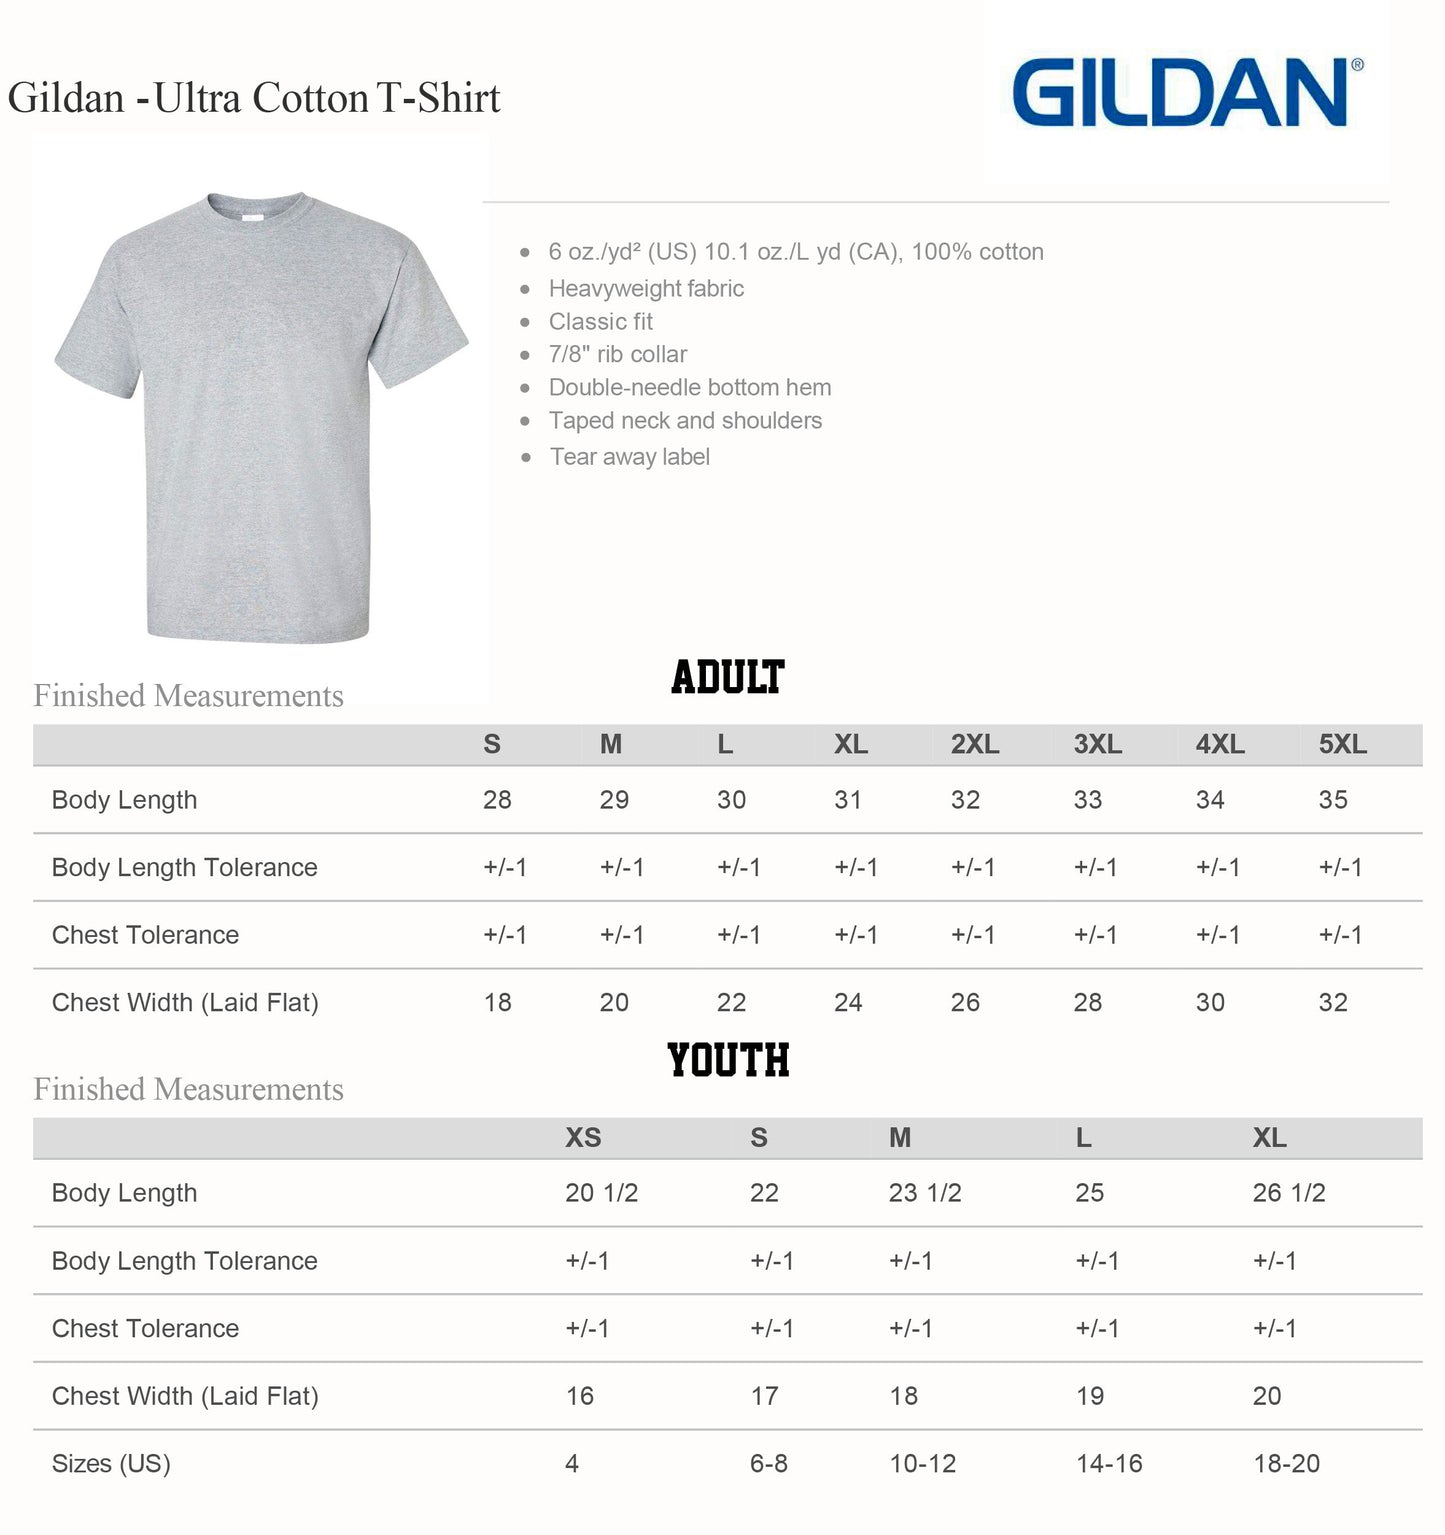 Tier One Volleyball Cotton Short Sleeve T-Shirt